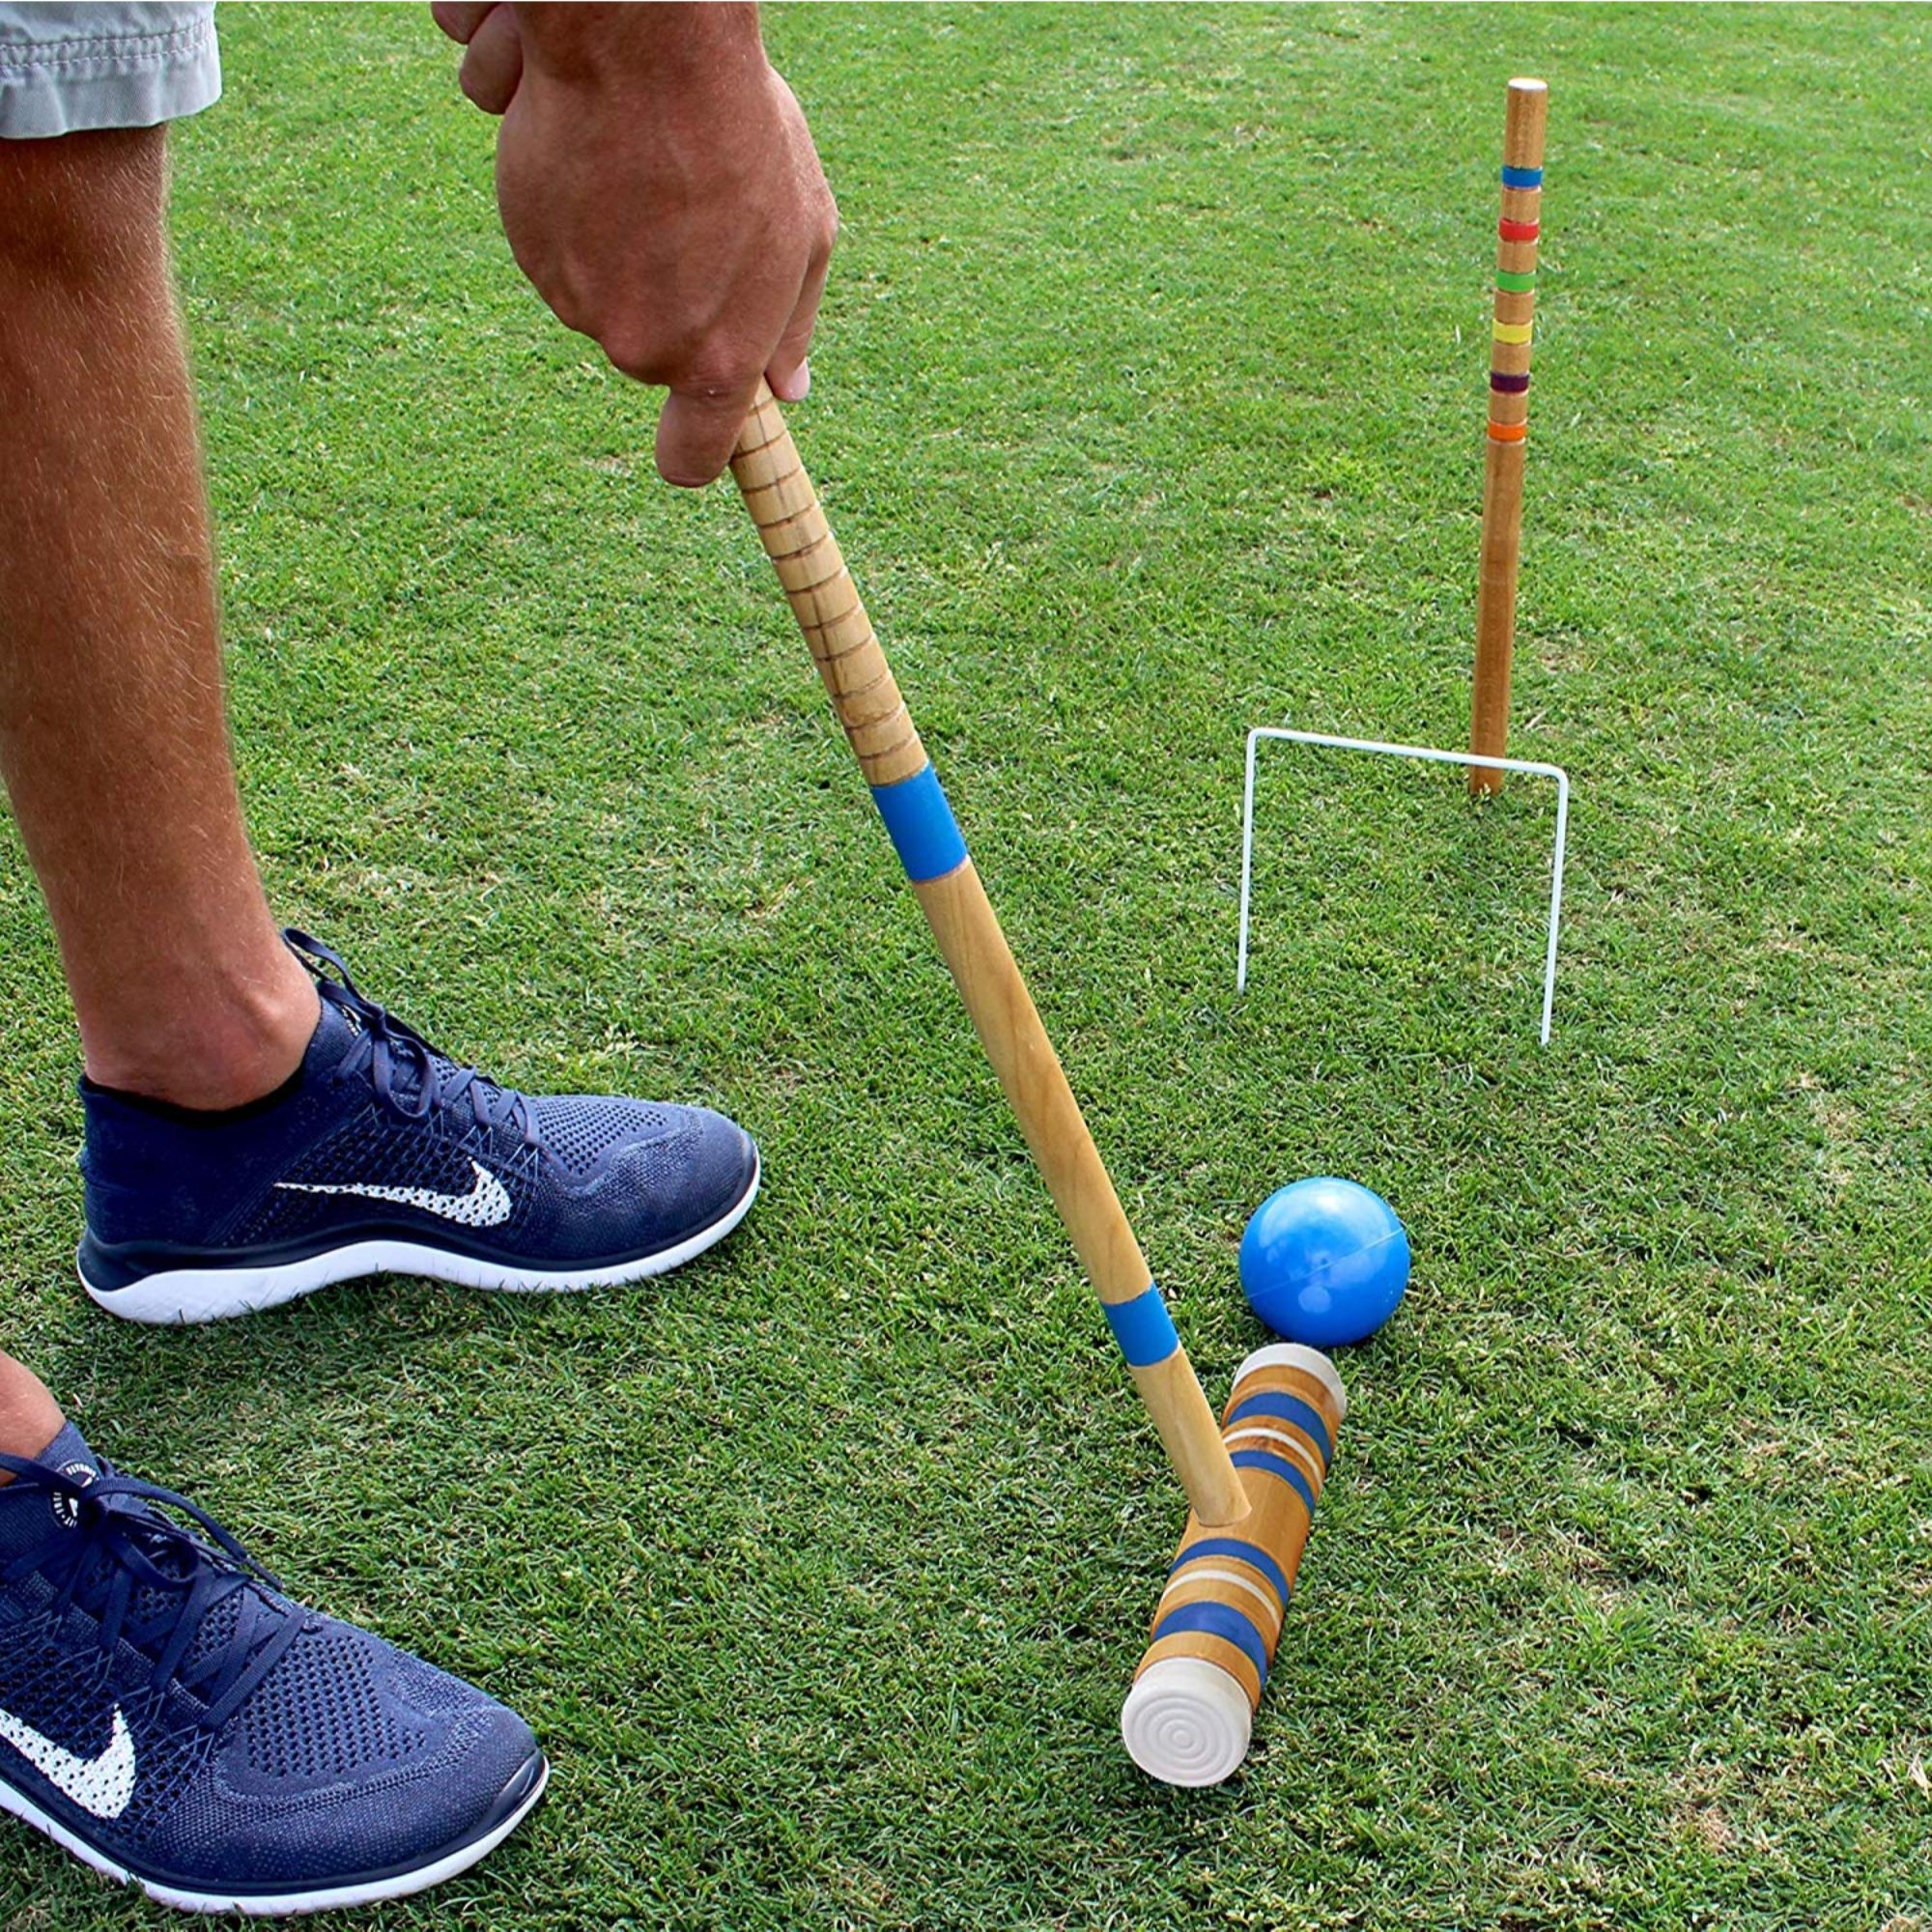 Croquet: Croquet Set, A game played by 2 or 4 players with mallets, 4 balls and 6 hoops. 2000x2000 HD Background.